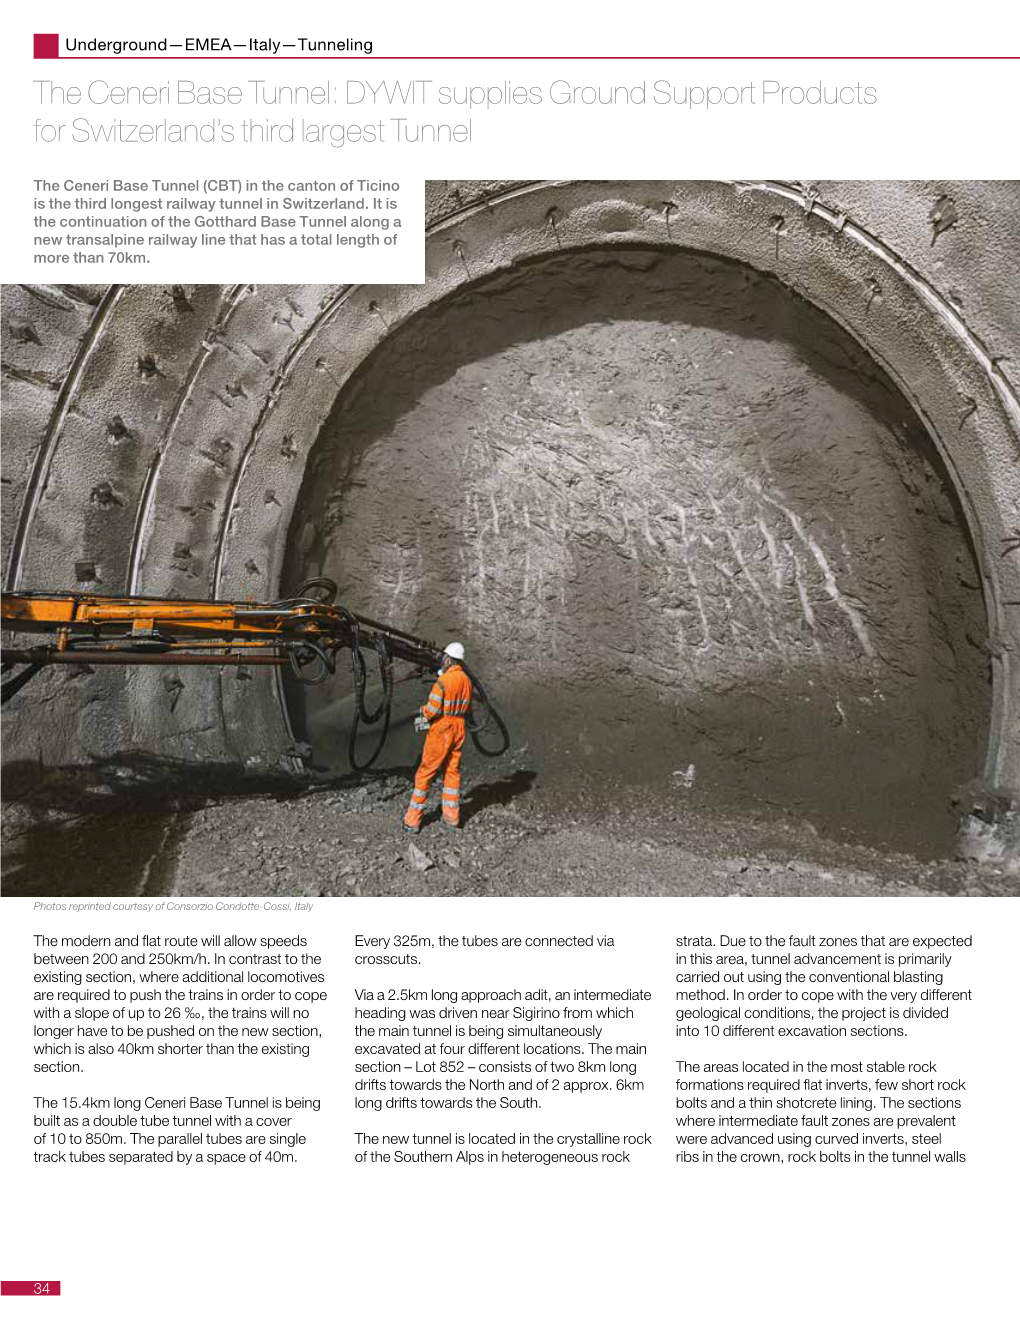 The Ceneri Base Tunnel: DYWIT Supplies Ground Support Products for Switzerland’S Third Largest Tunnel